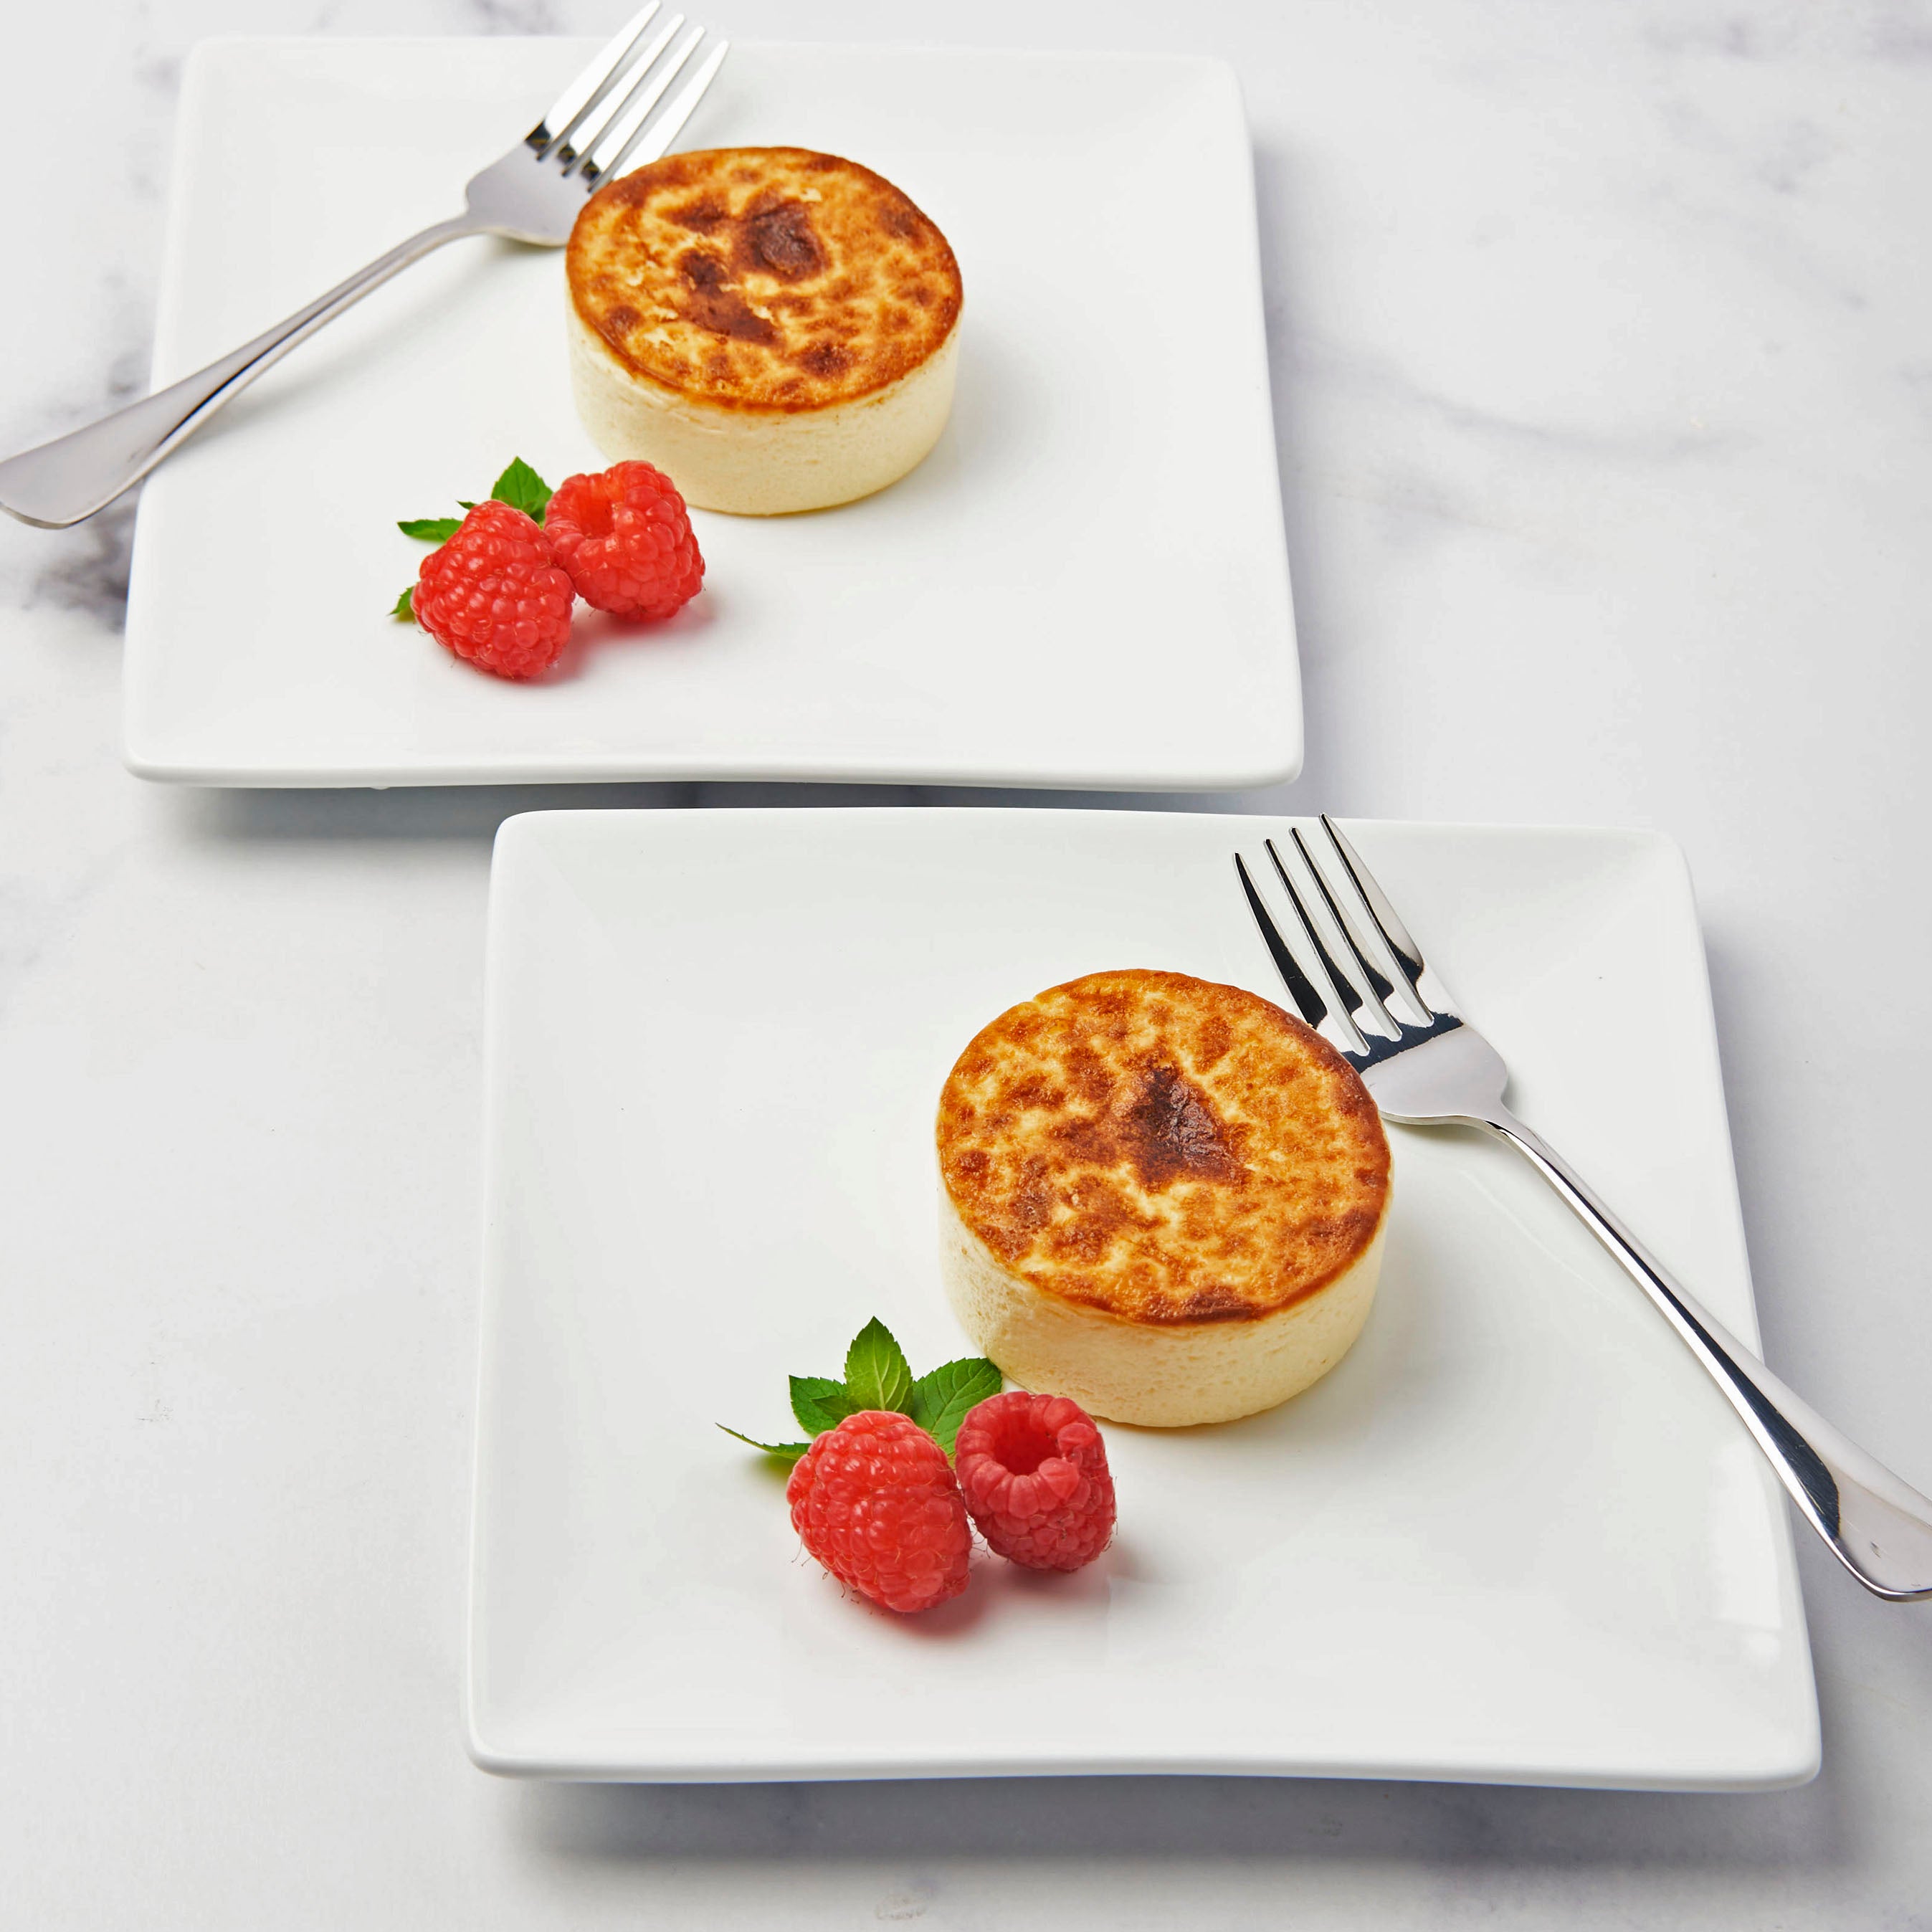 Creamy French made Basque cheesecake on a plate ready to eat